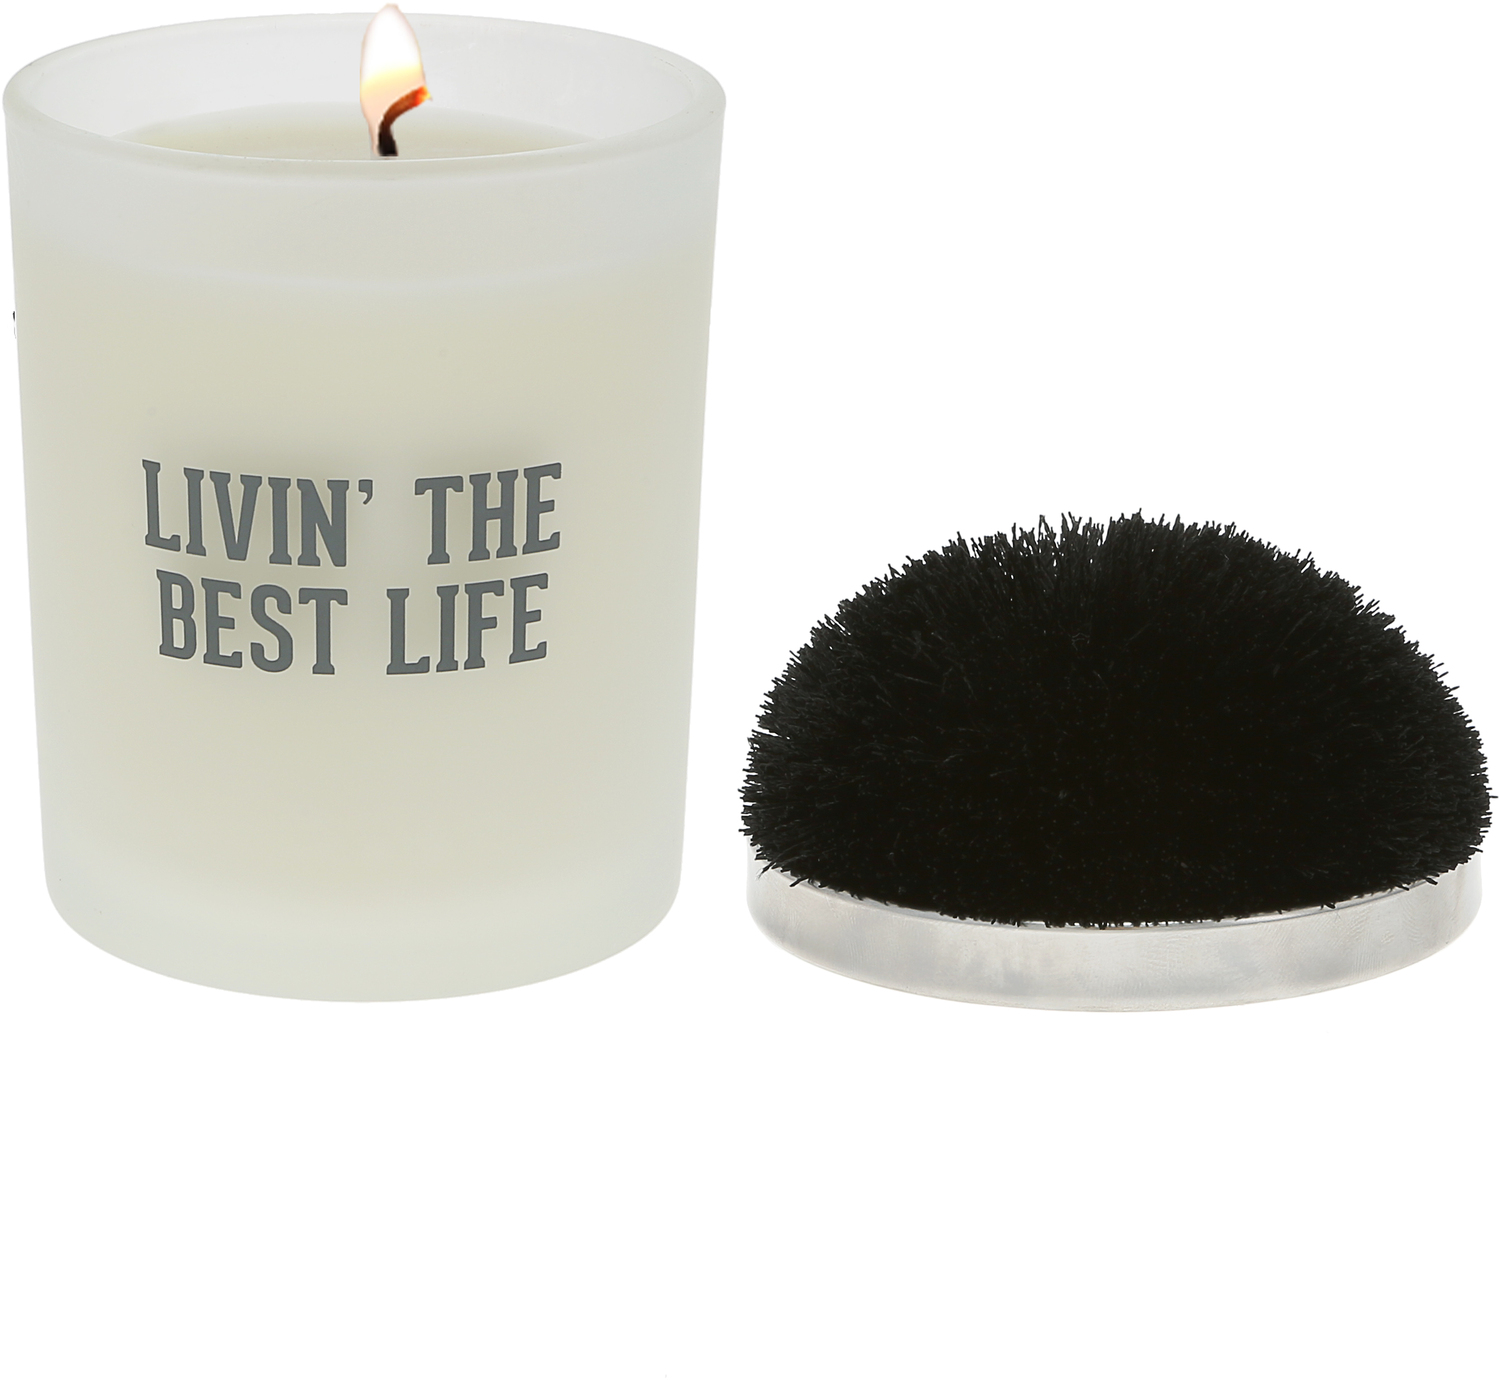 Best Life - Black by Repre-Scent - Best Life - Black - 5.5 oz - 100% Soy Wax Candle with Pom Pom Lid
Scent: Tranquility